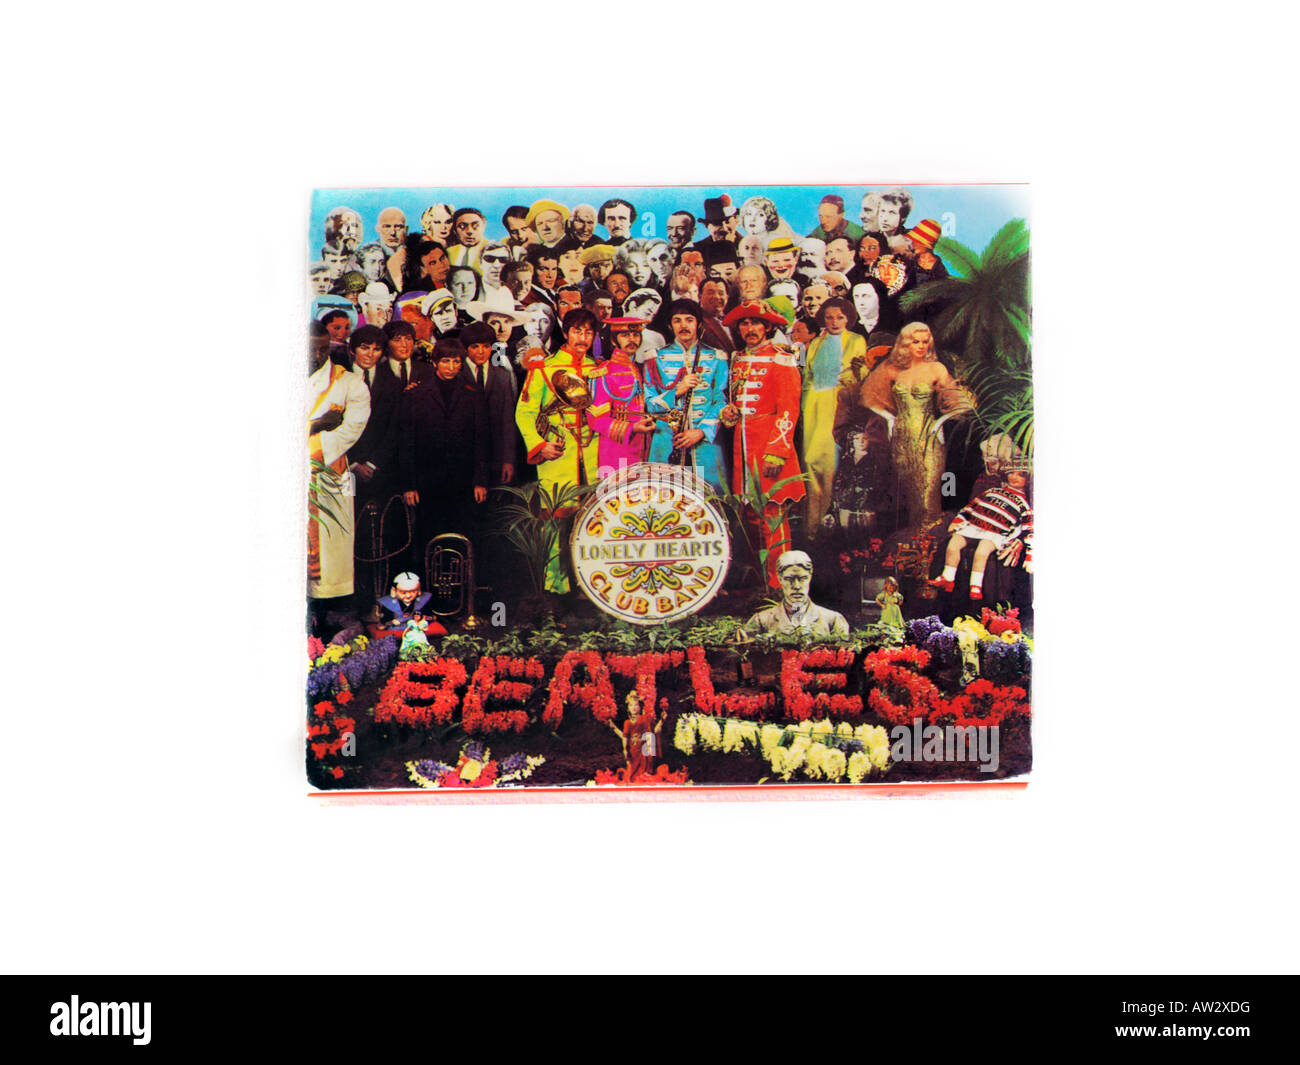 Berühmte CD Sgt Peppers Lonely Hearts Club Band Stockfoto